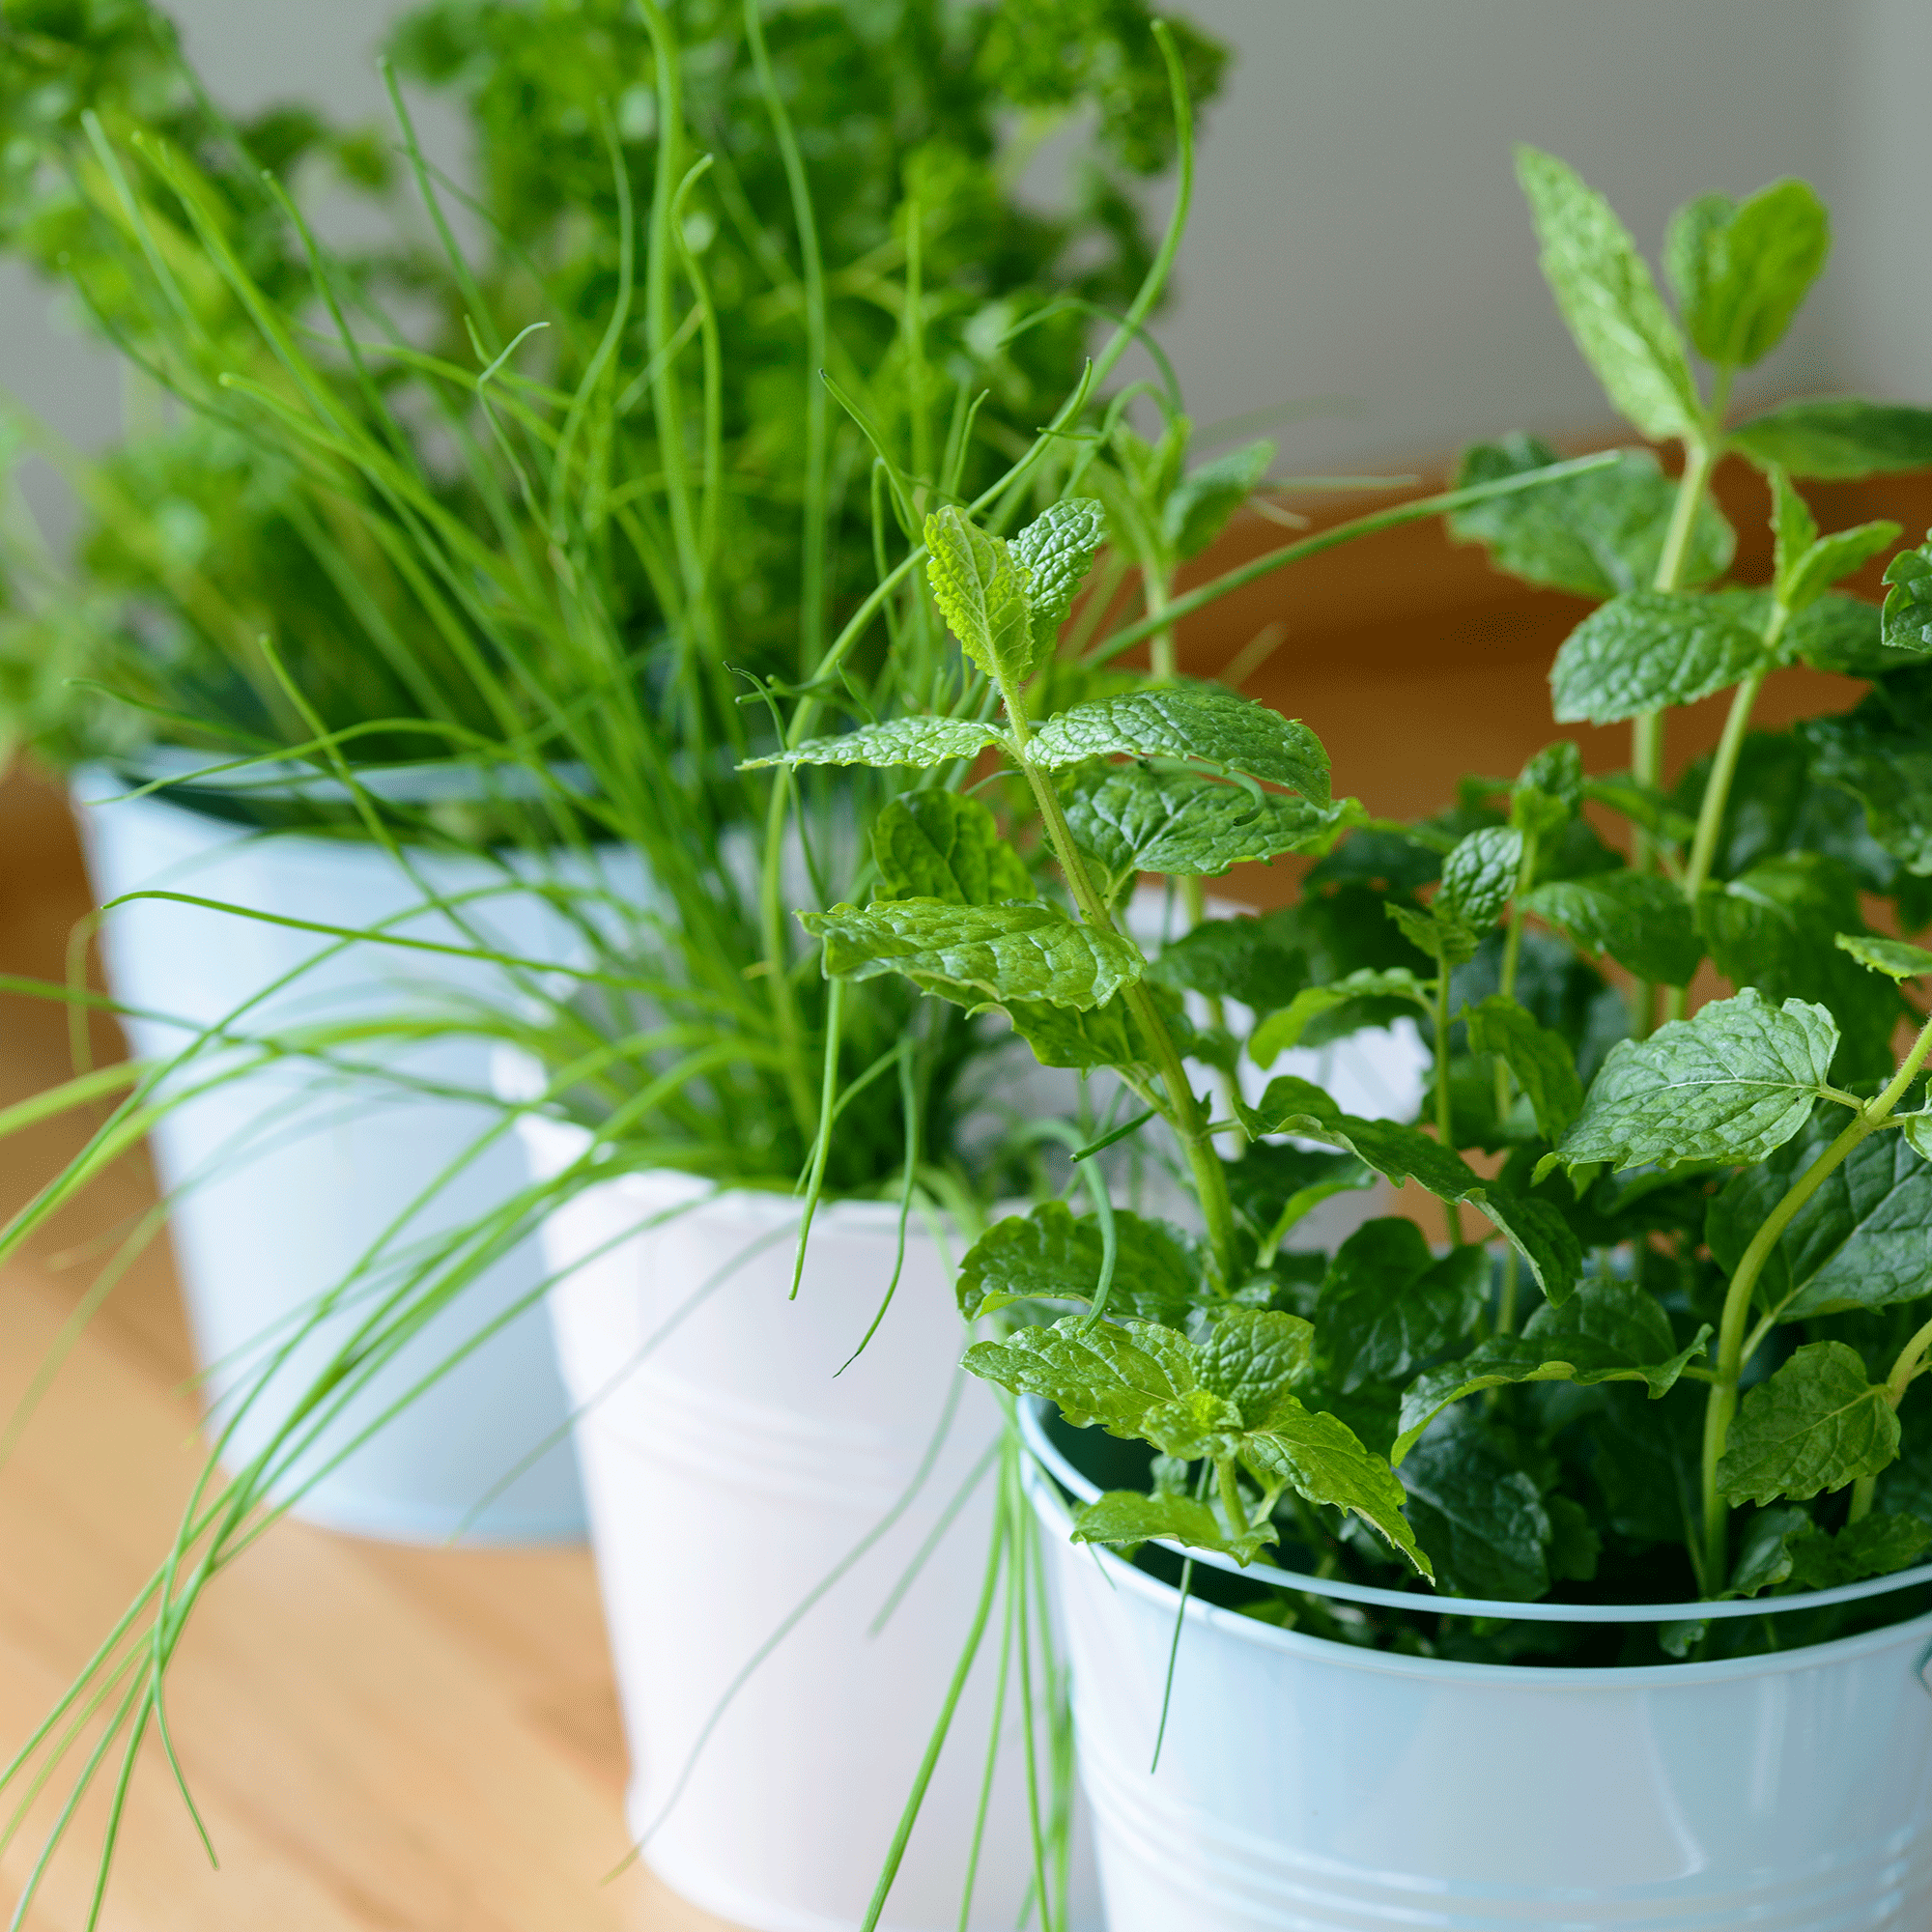 Herbs in turquoise plant pots inside